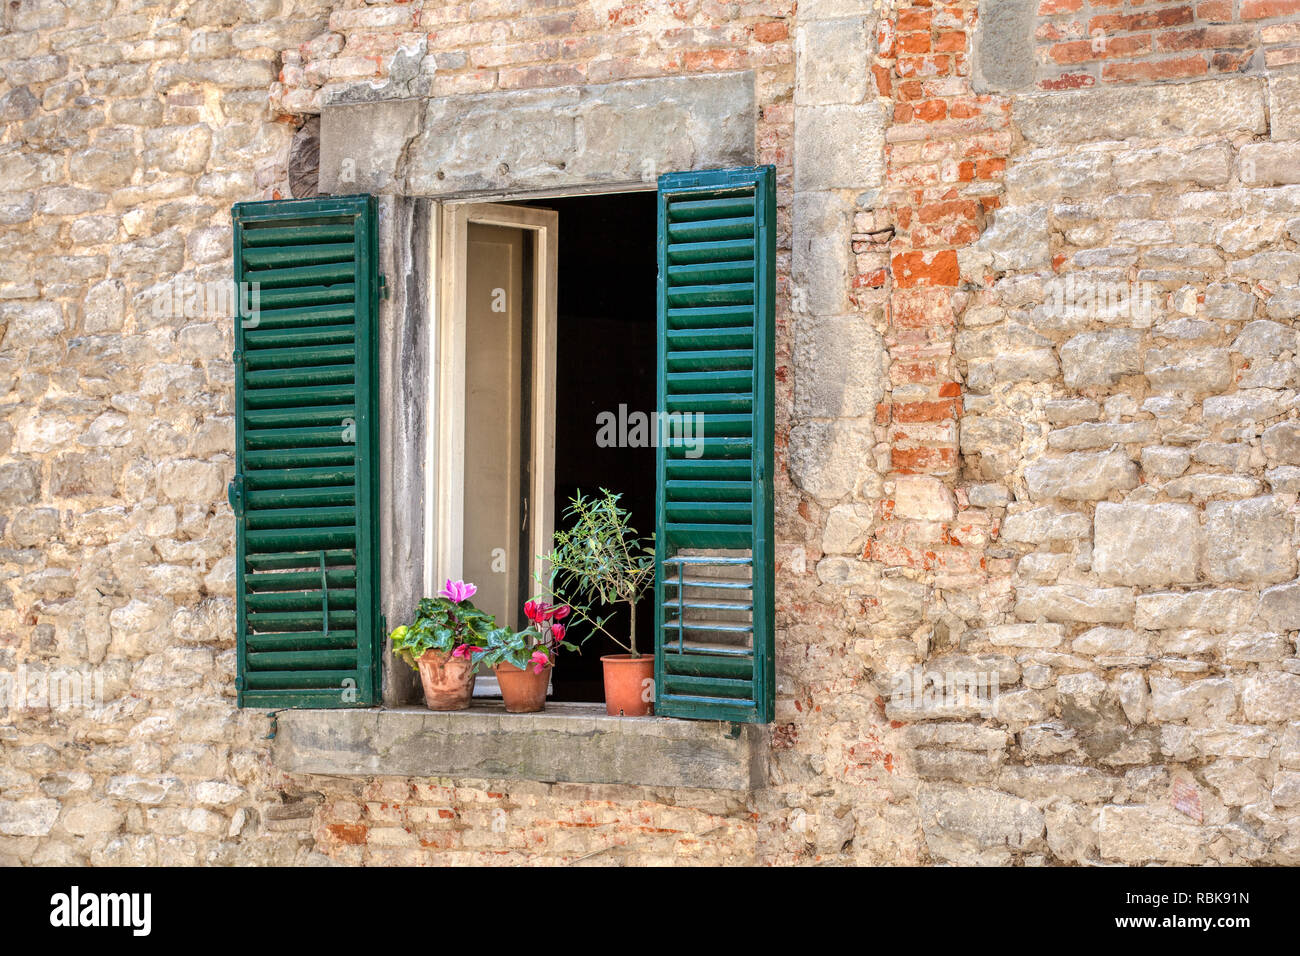 Photograph was taken of a rustic, weathered window with faded green wood shutters in the village of Cortona, Italy located in the heart of Tuscany. Stock Photo